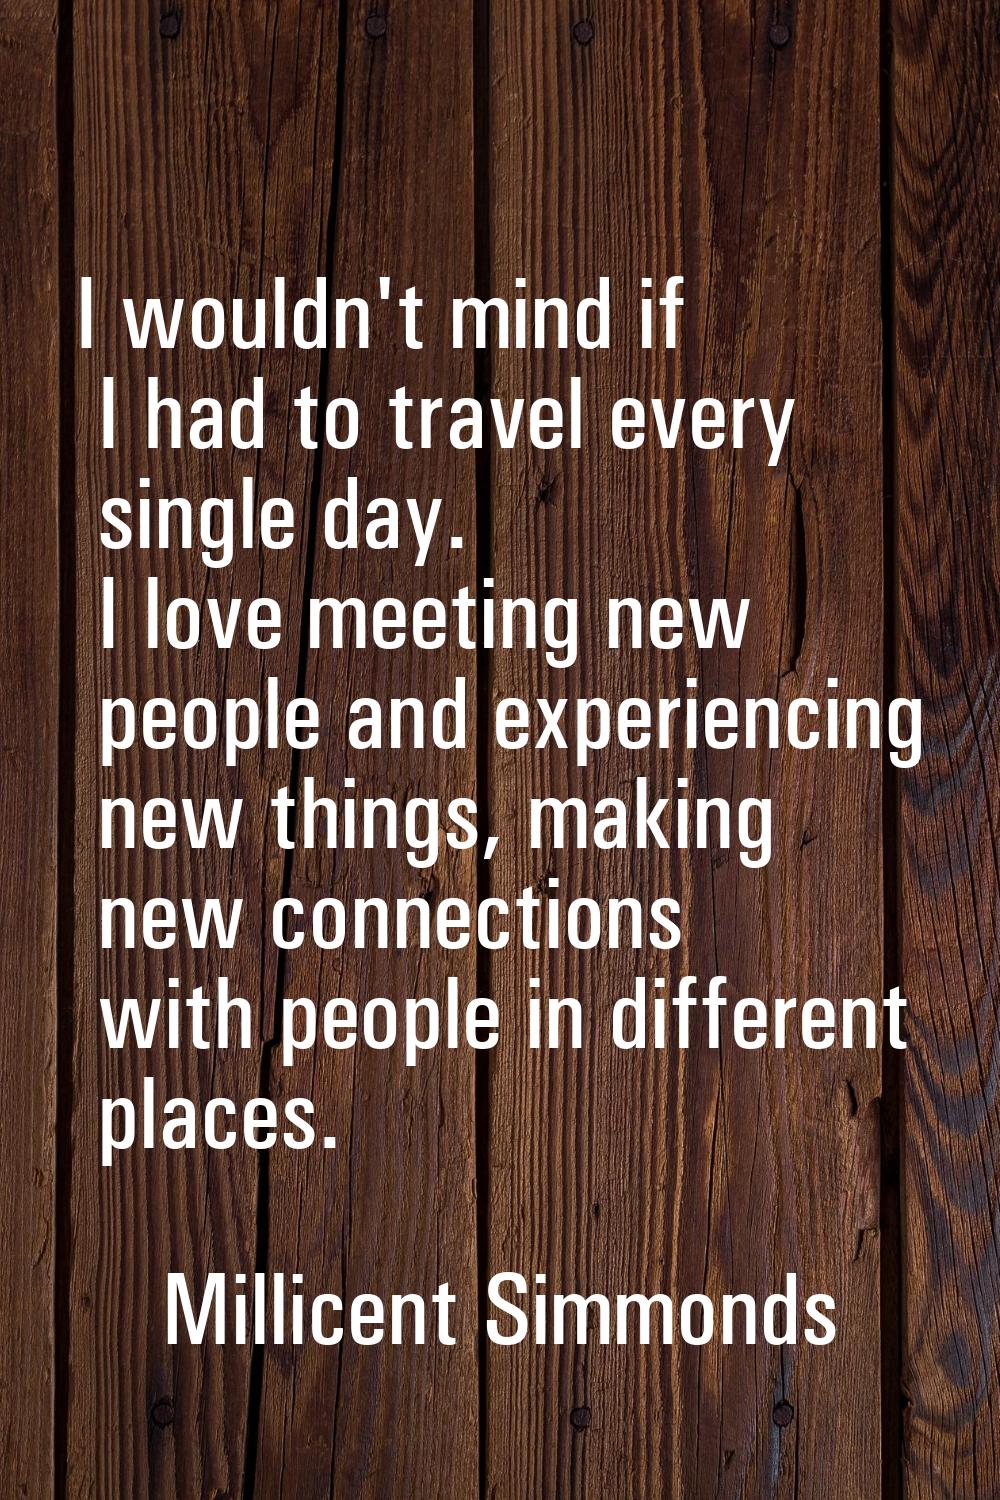 I wouldn't mind if I had to travel every single day. I love meeting new people and experiencing new